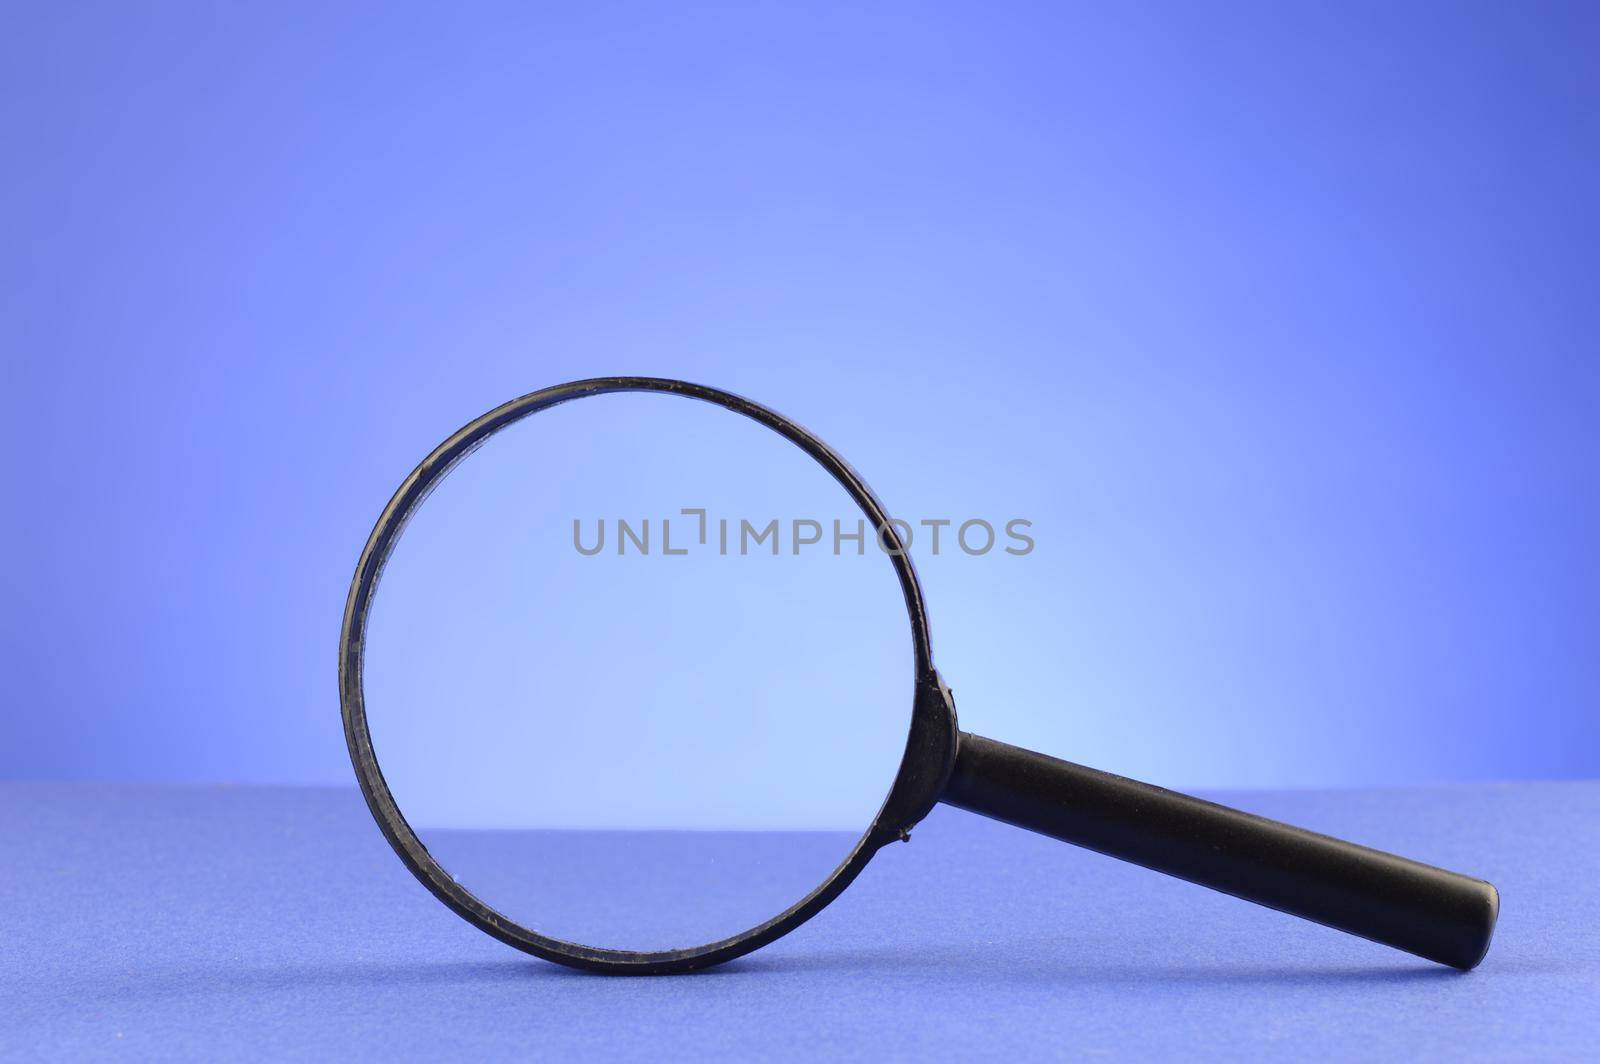 A magnify glass over a blue background for searching the details.